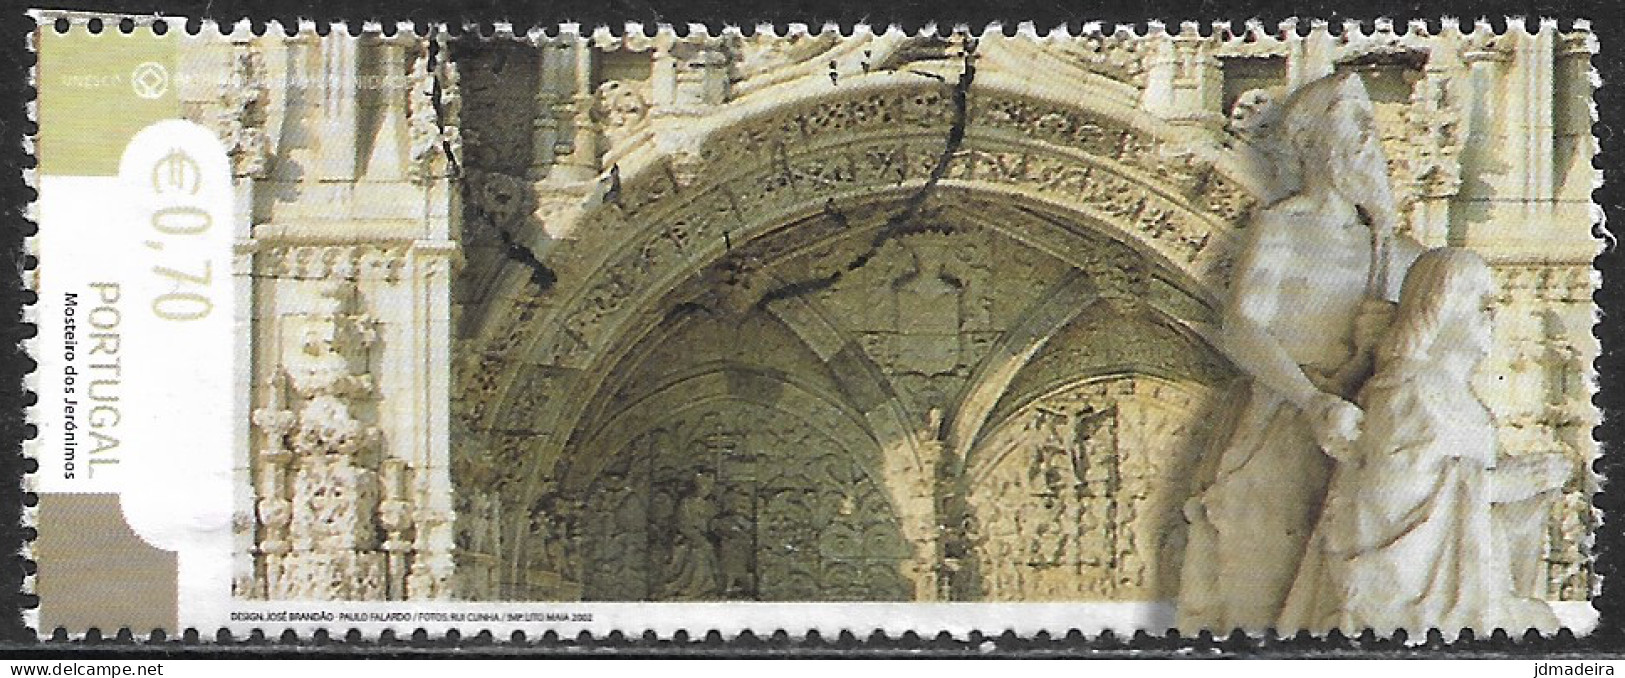 Portugal – 2002 World Heritage UNESCO 0,70 Used Stamp - Oblitérés